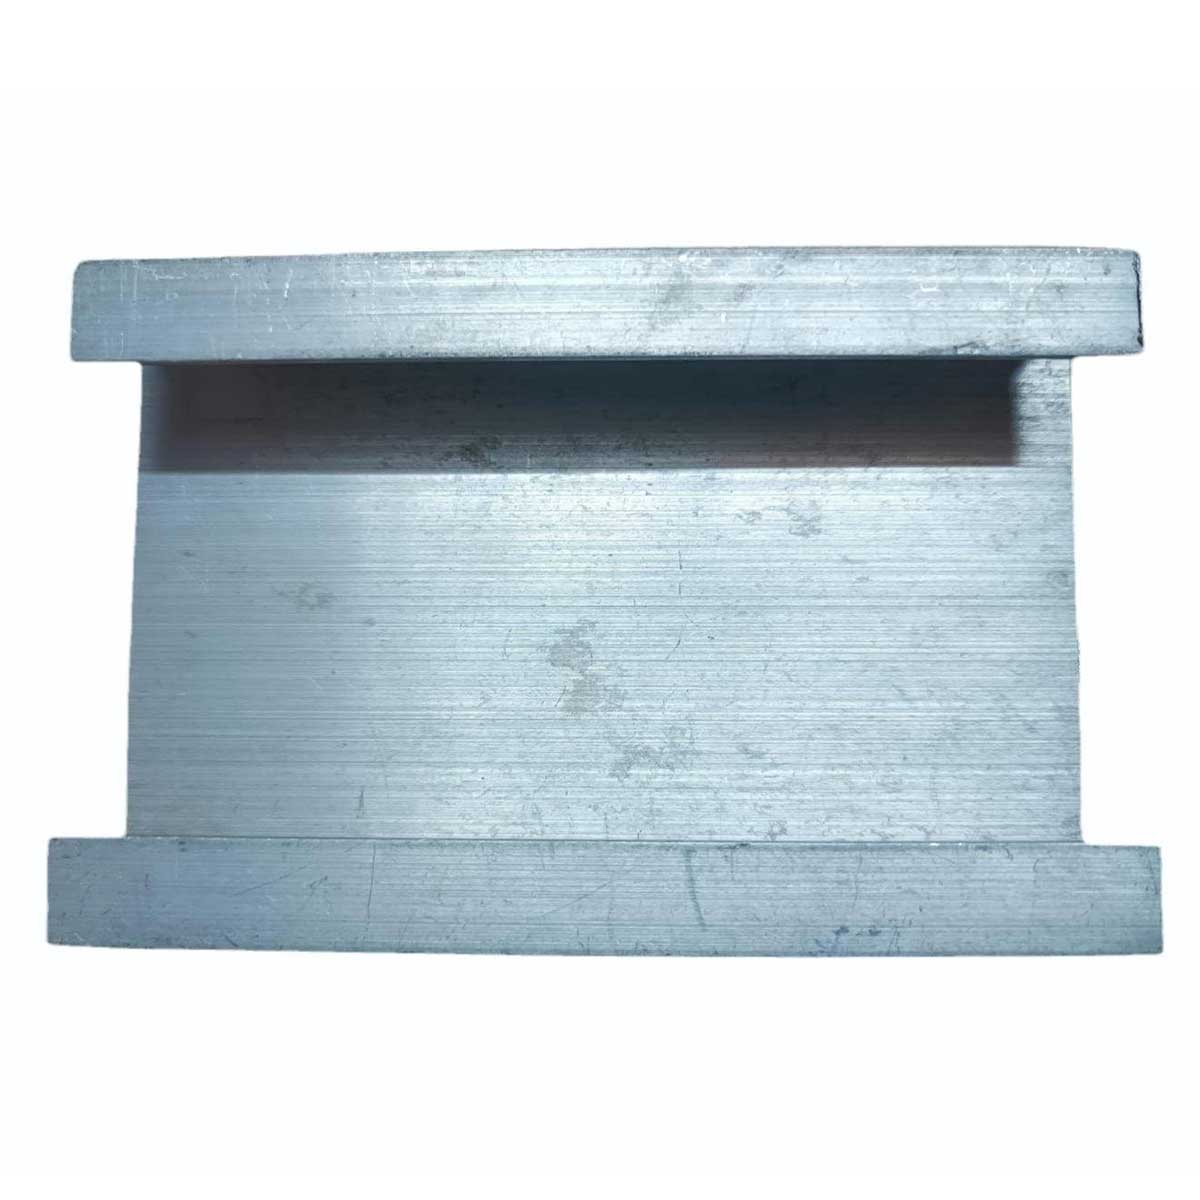 Elevation Aluminium C Channel Manufacturers, Suppliers in Palghar